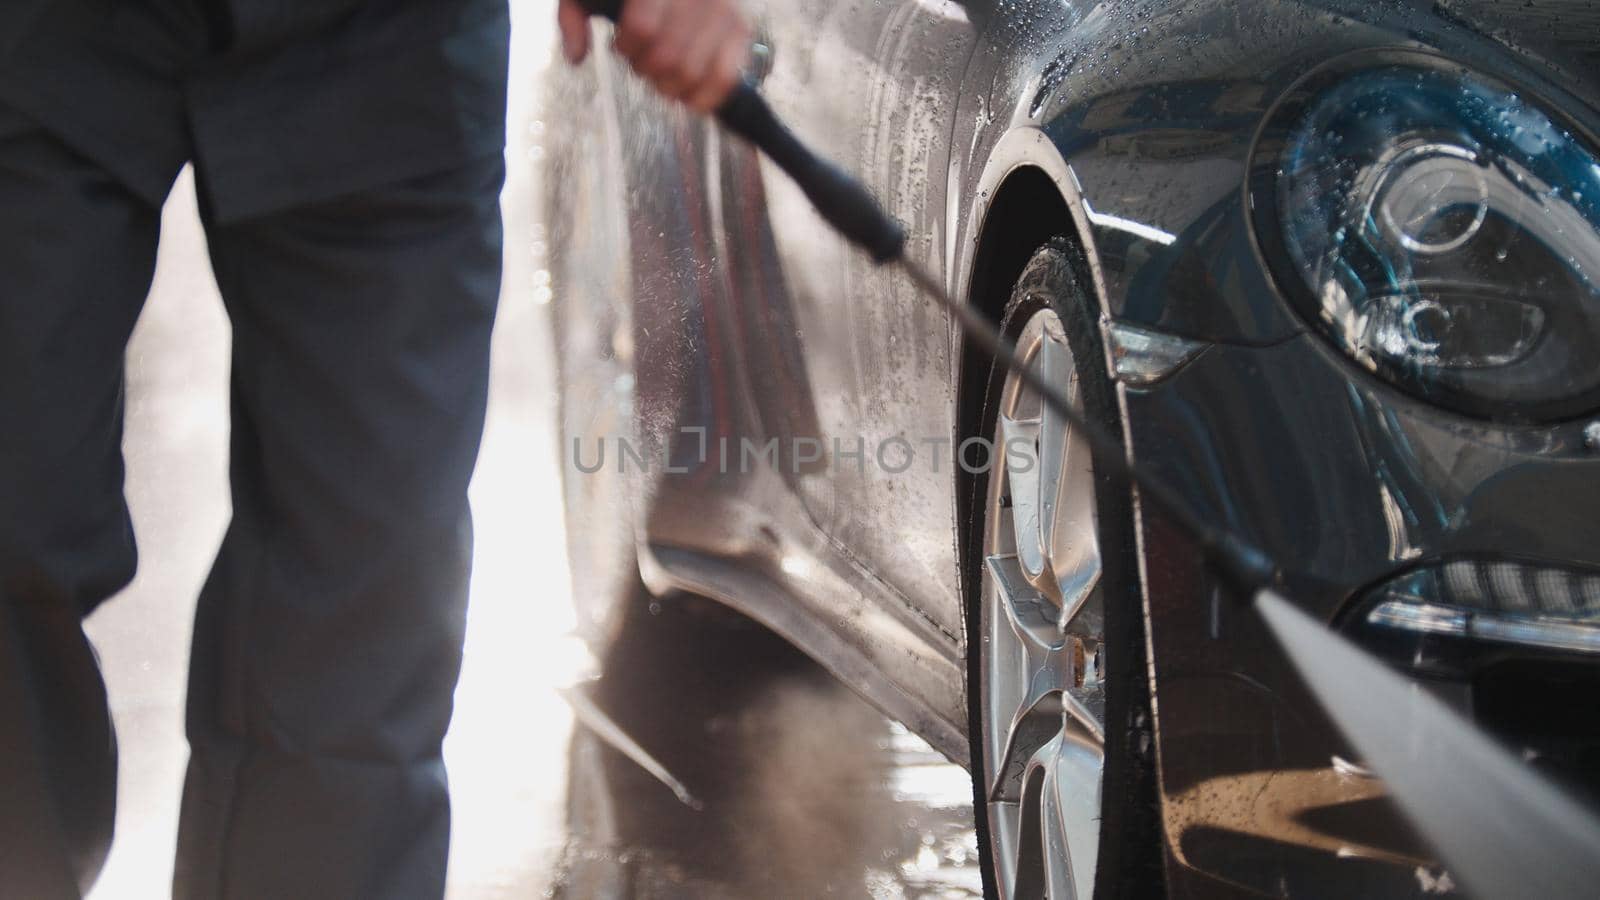 Worker in garage automobile service is washing a car in the suds by water hoses, telephoto, detail close up